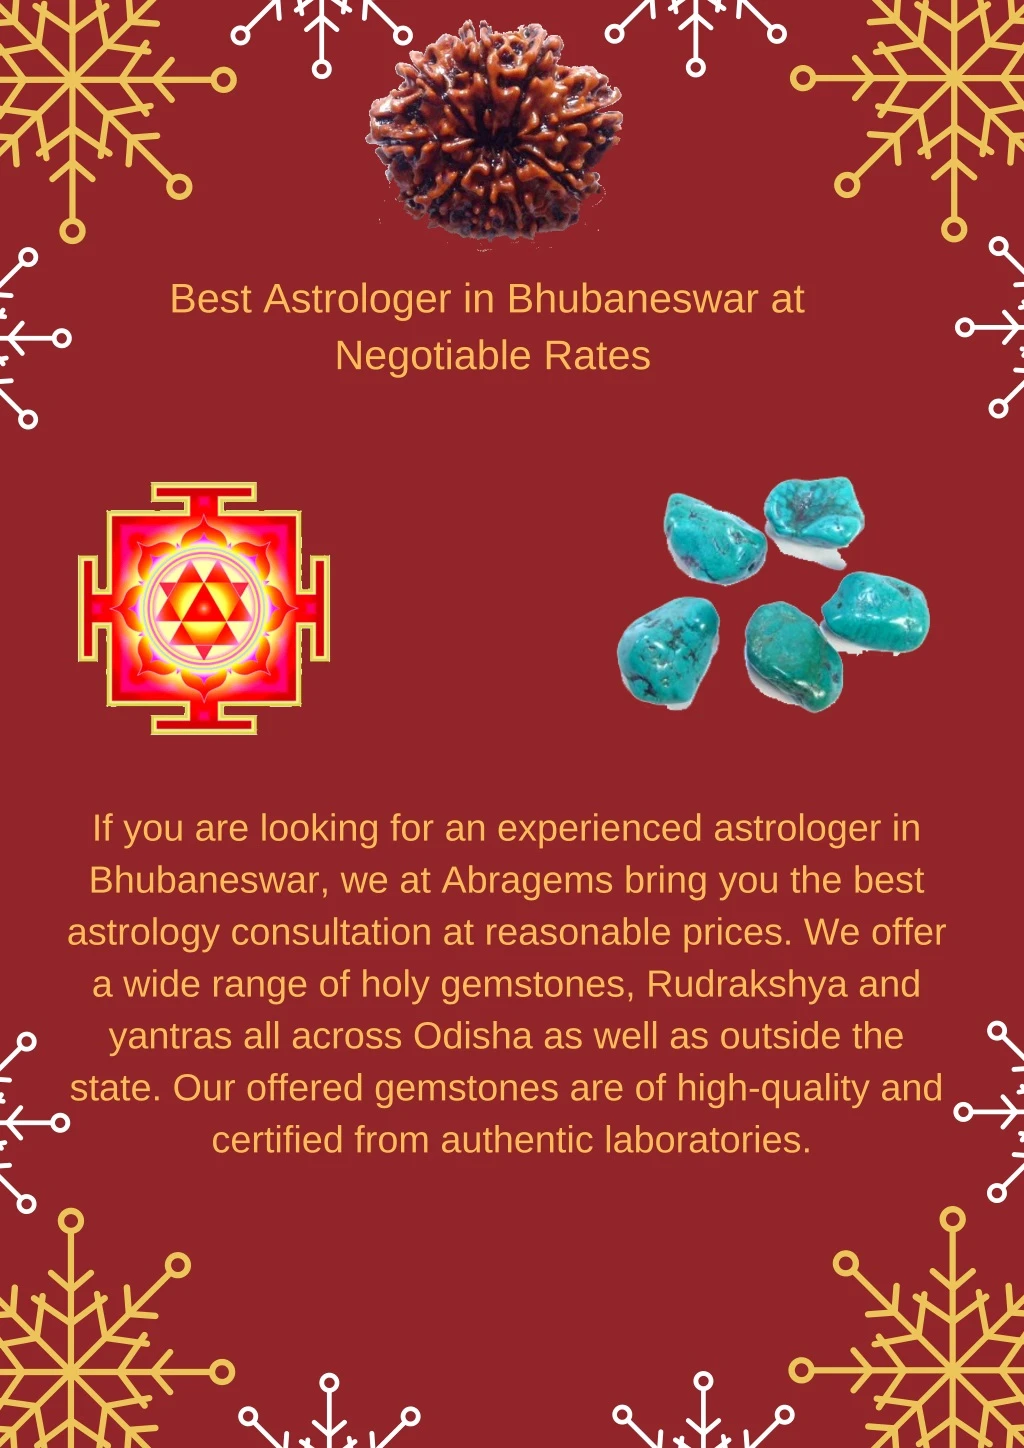 best astrologer in bhubaneswar at negotiable rates